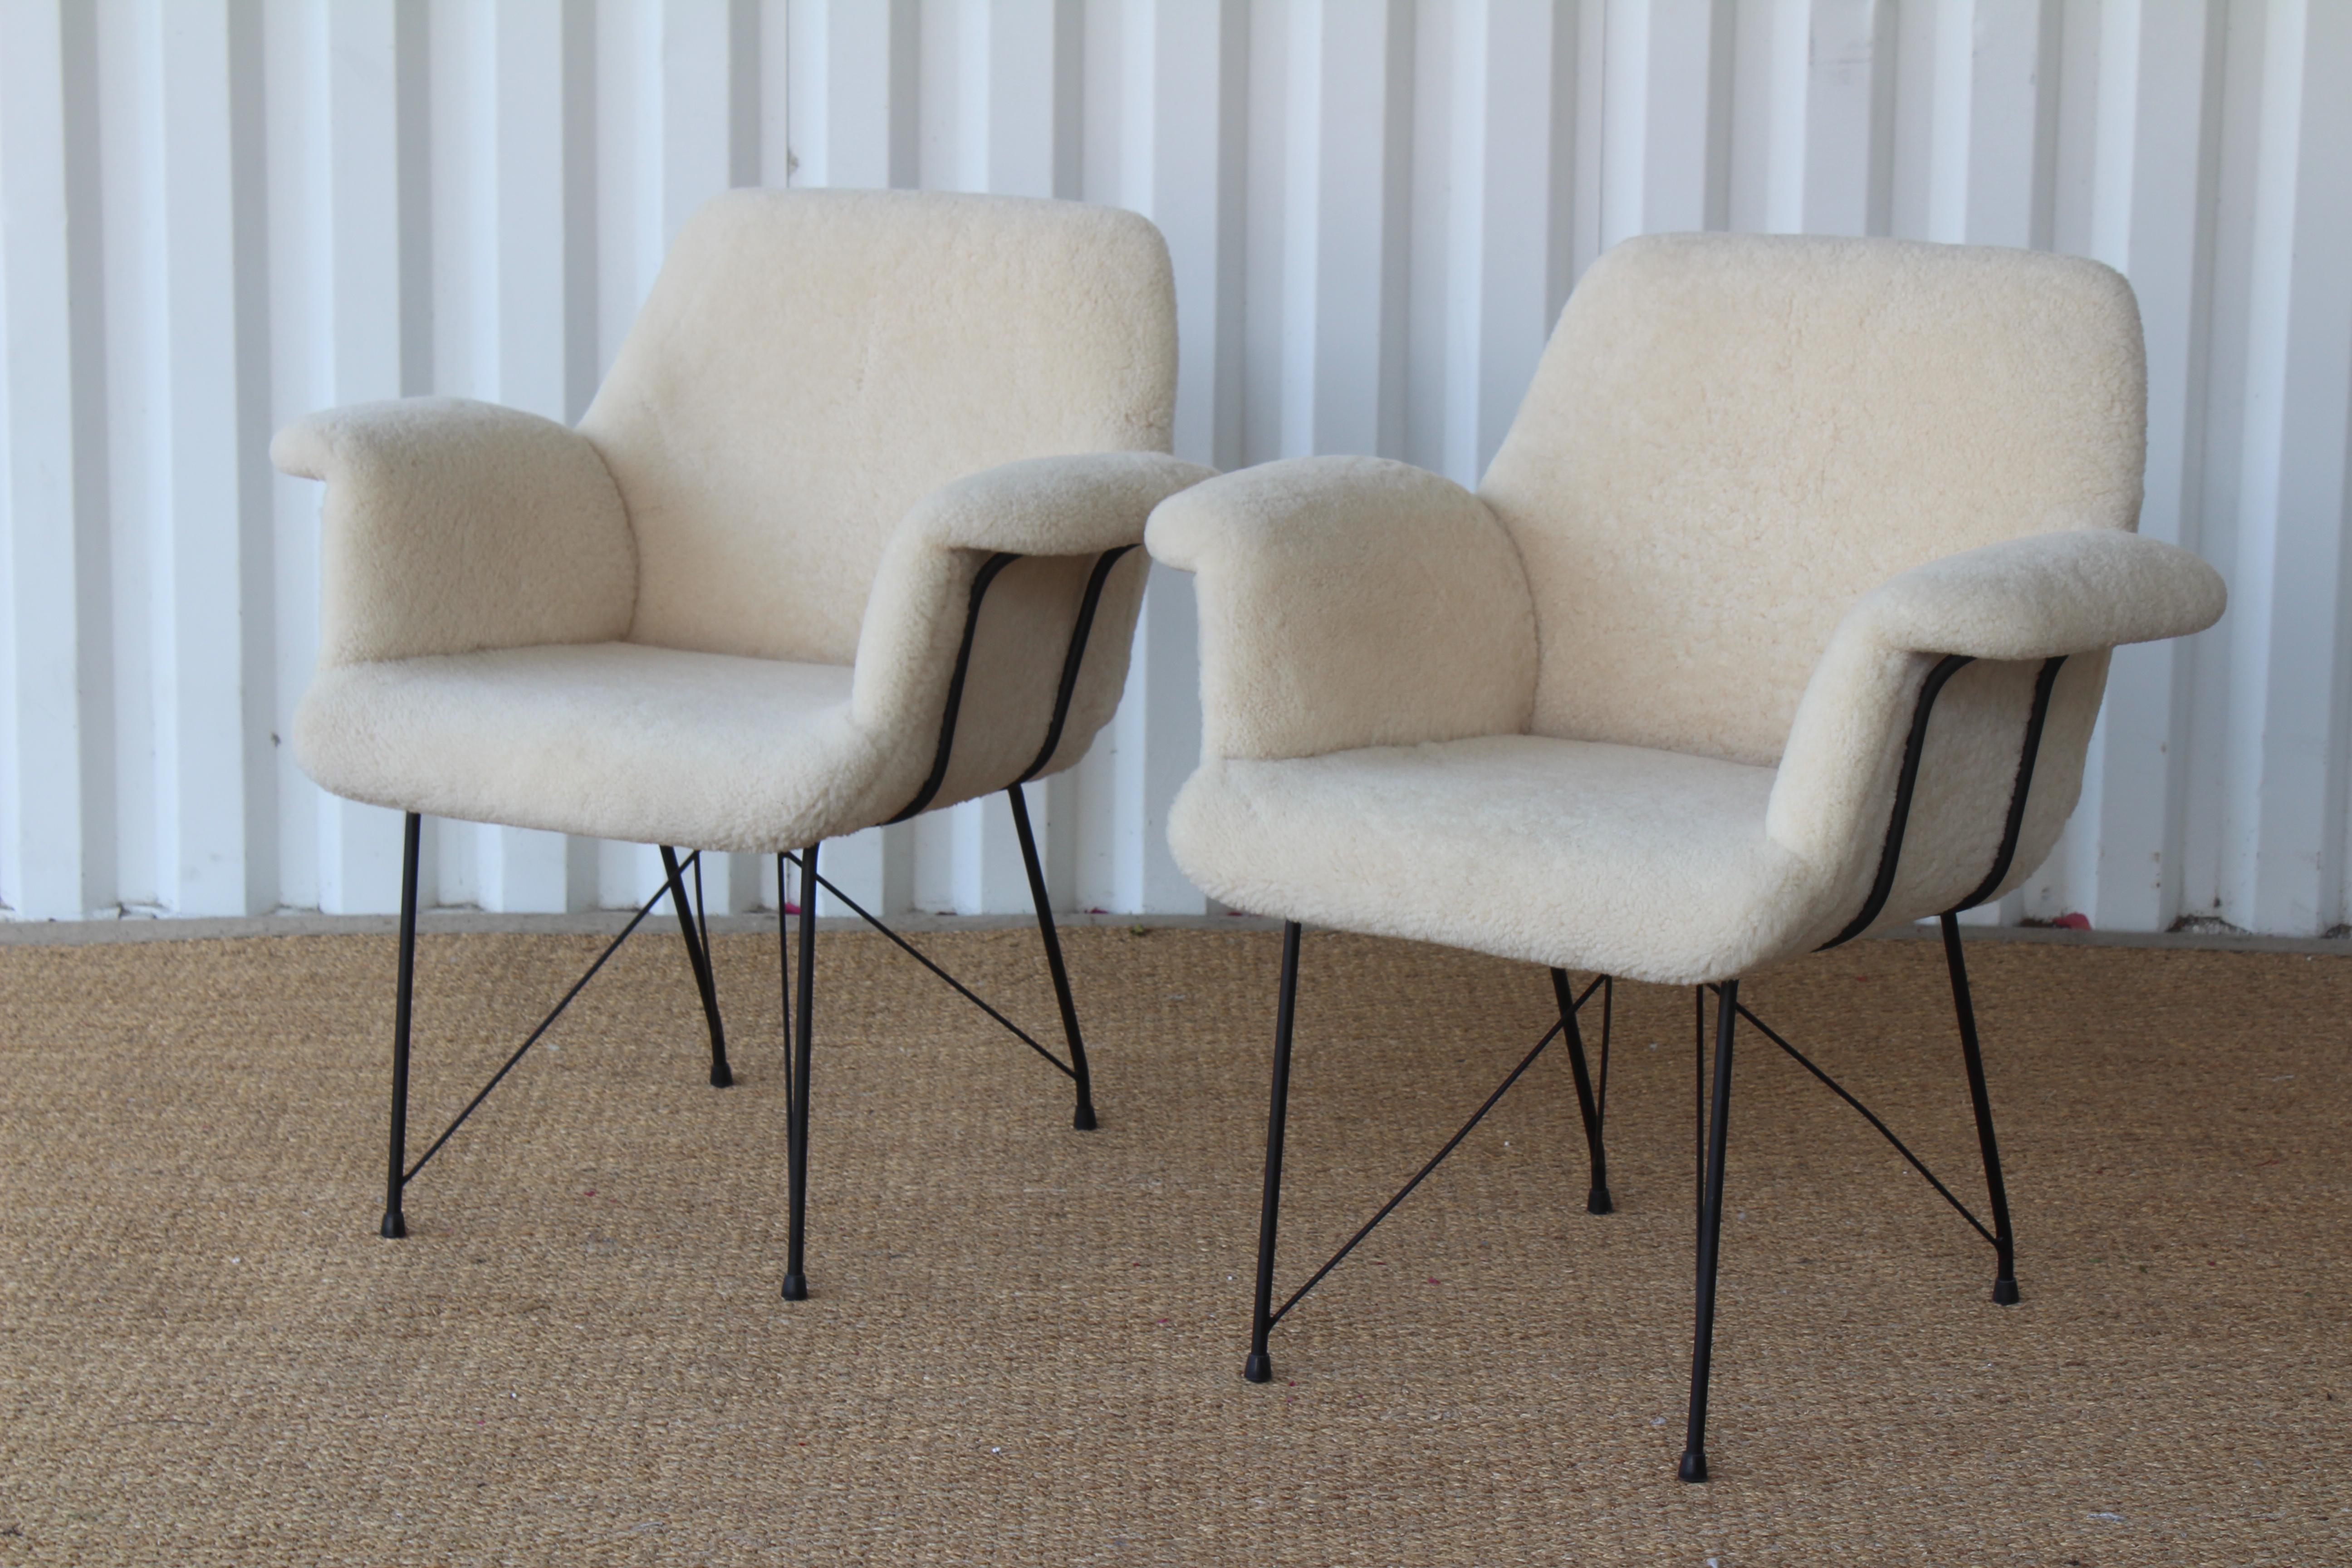 Rare pair of armchairs designed by Carlo Hauner and Martin Eisler for Forma, Brazil, 1955. The pair have been completely restored with new sheep hide upholstery. The solid iron bases have been powder coated back the original black finish. New rubber